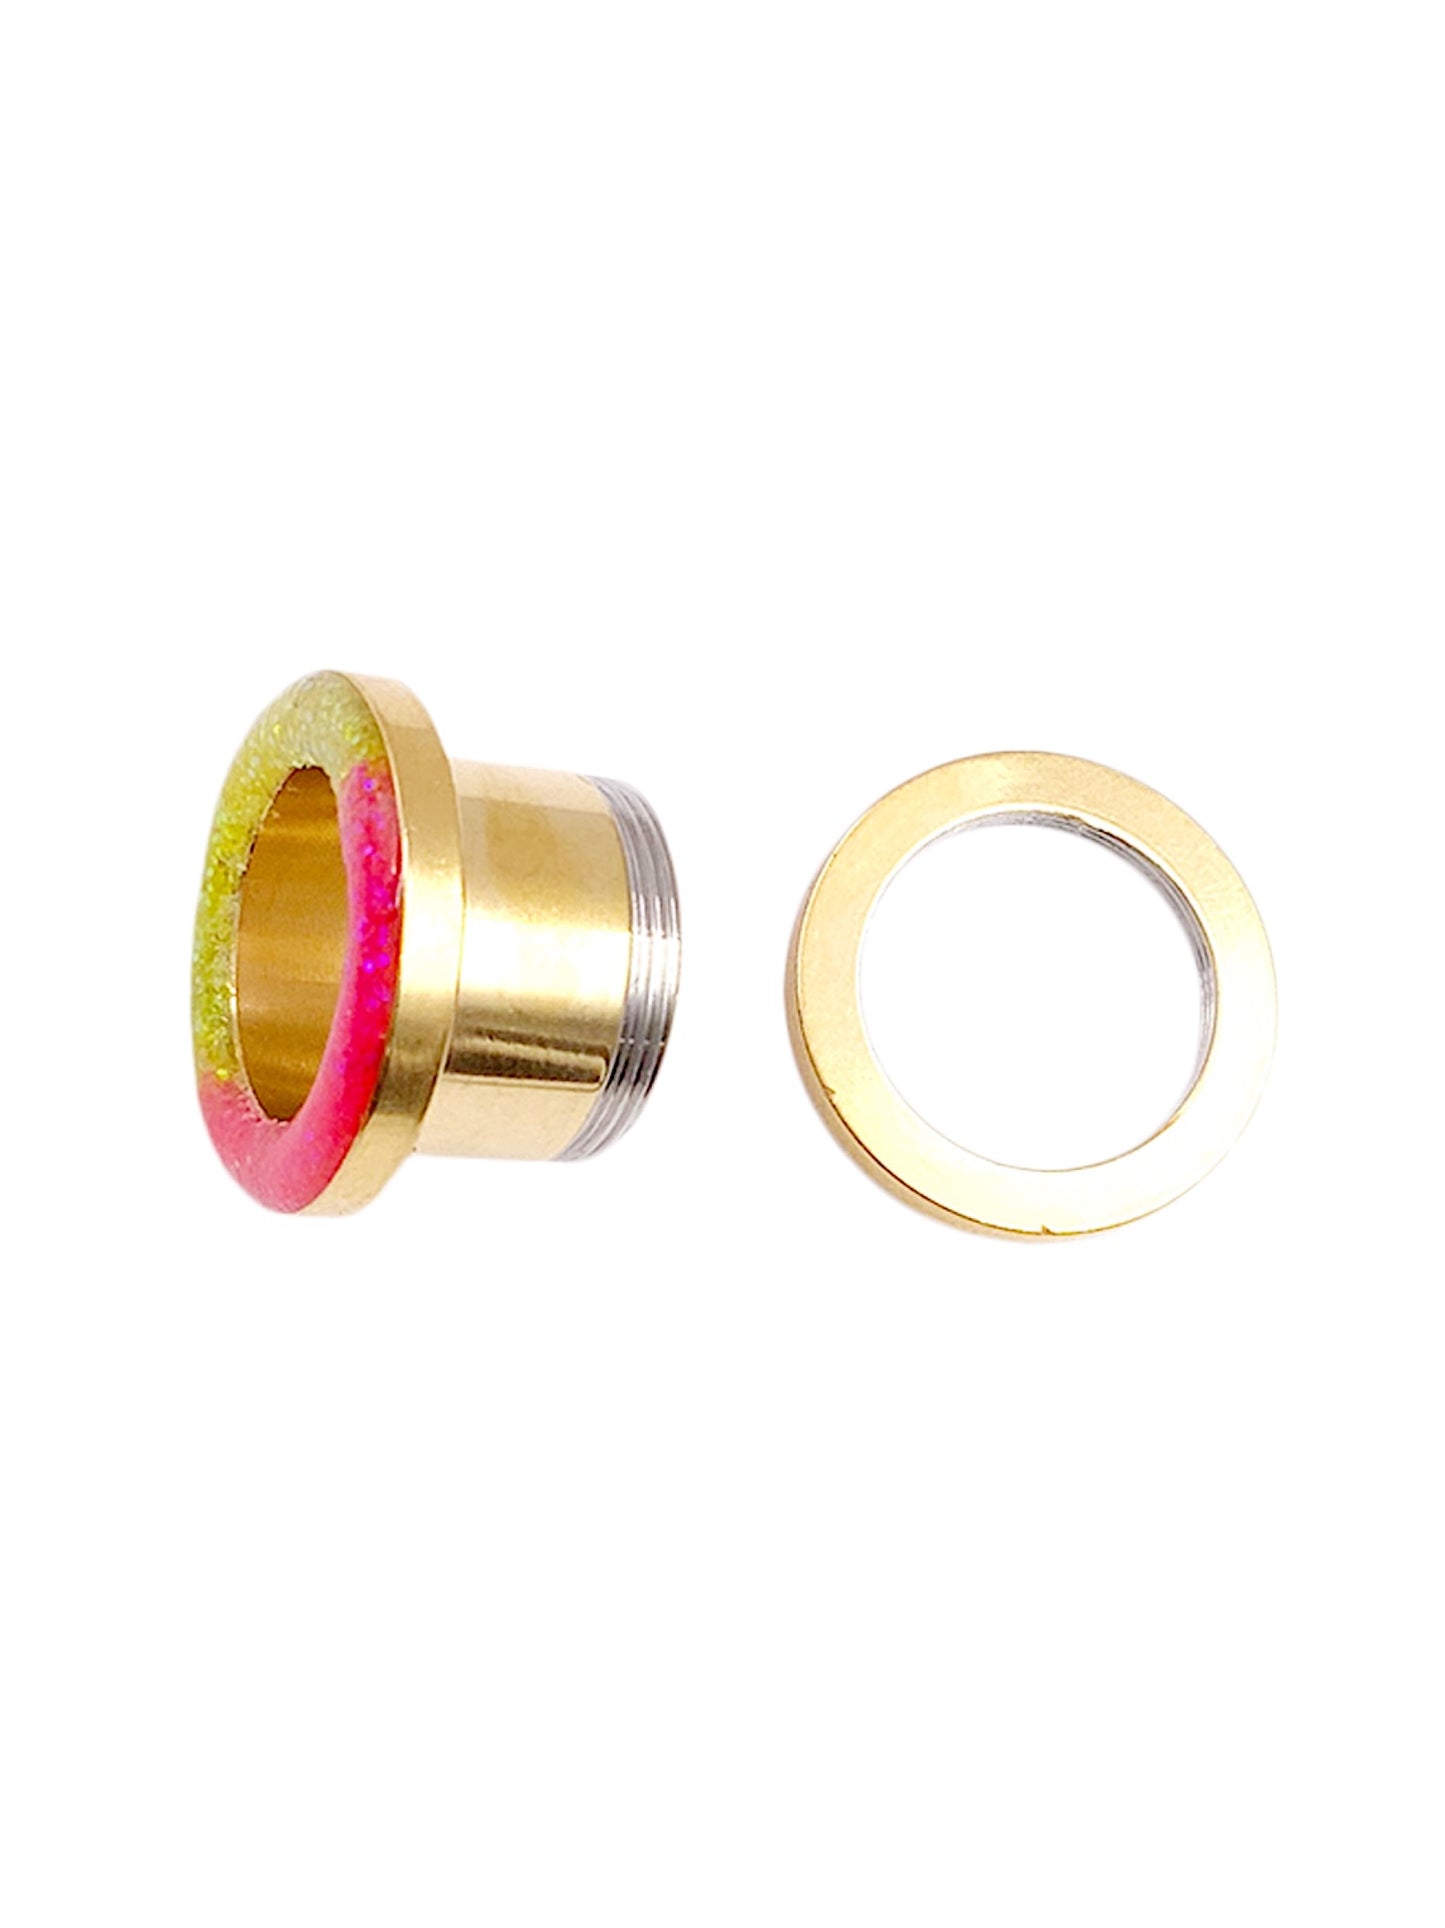 Retro Glow Yellow and Hot Pink Tunnel Plugs